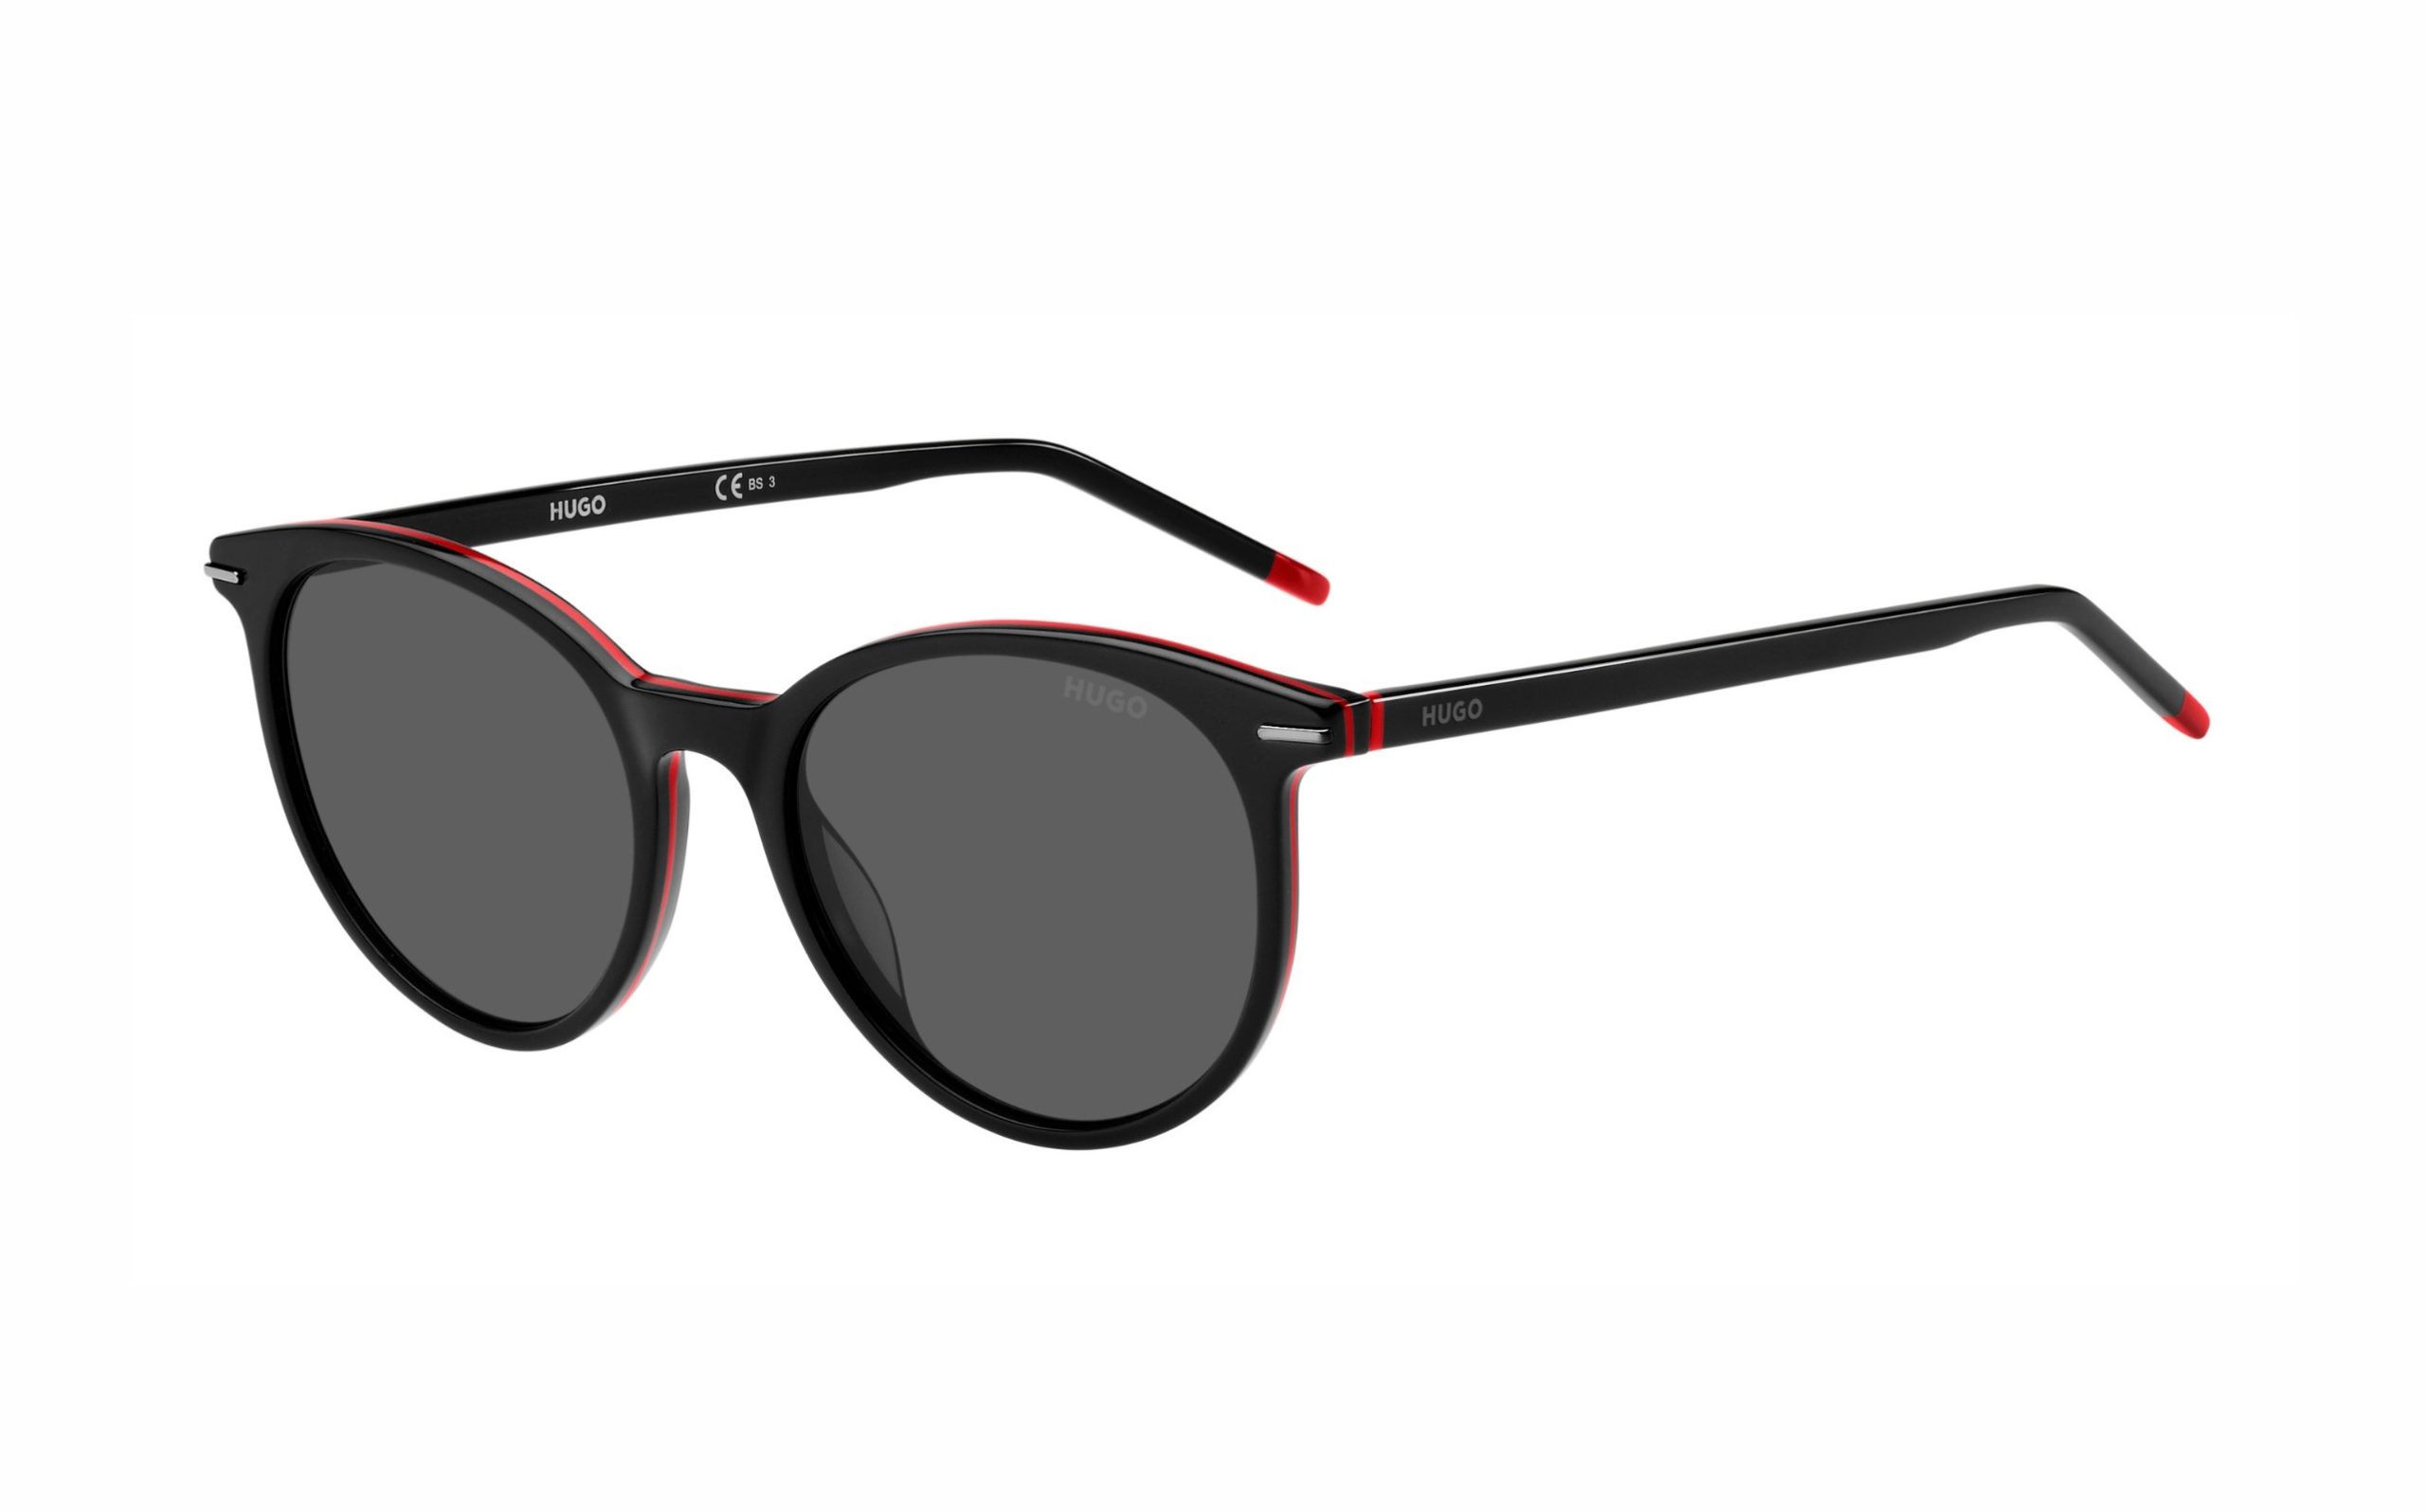 Retro Polarizing Designer Bb Sunglasses For Men And Women UV400 Protection,  Acetate Frame, Mirrored Lenses, And Box Fashionable Outdoor Shades For  Fashion And Classic Style B6935 SIZE 52 20 From Guomimenlu, $50.21 |  DHgate.Com